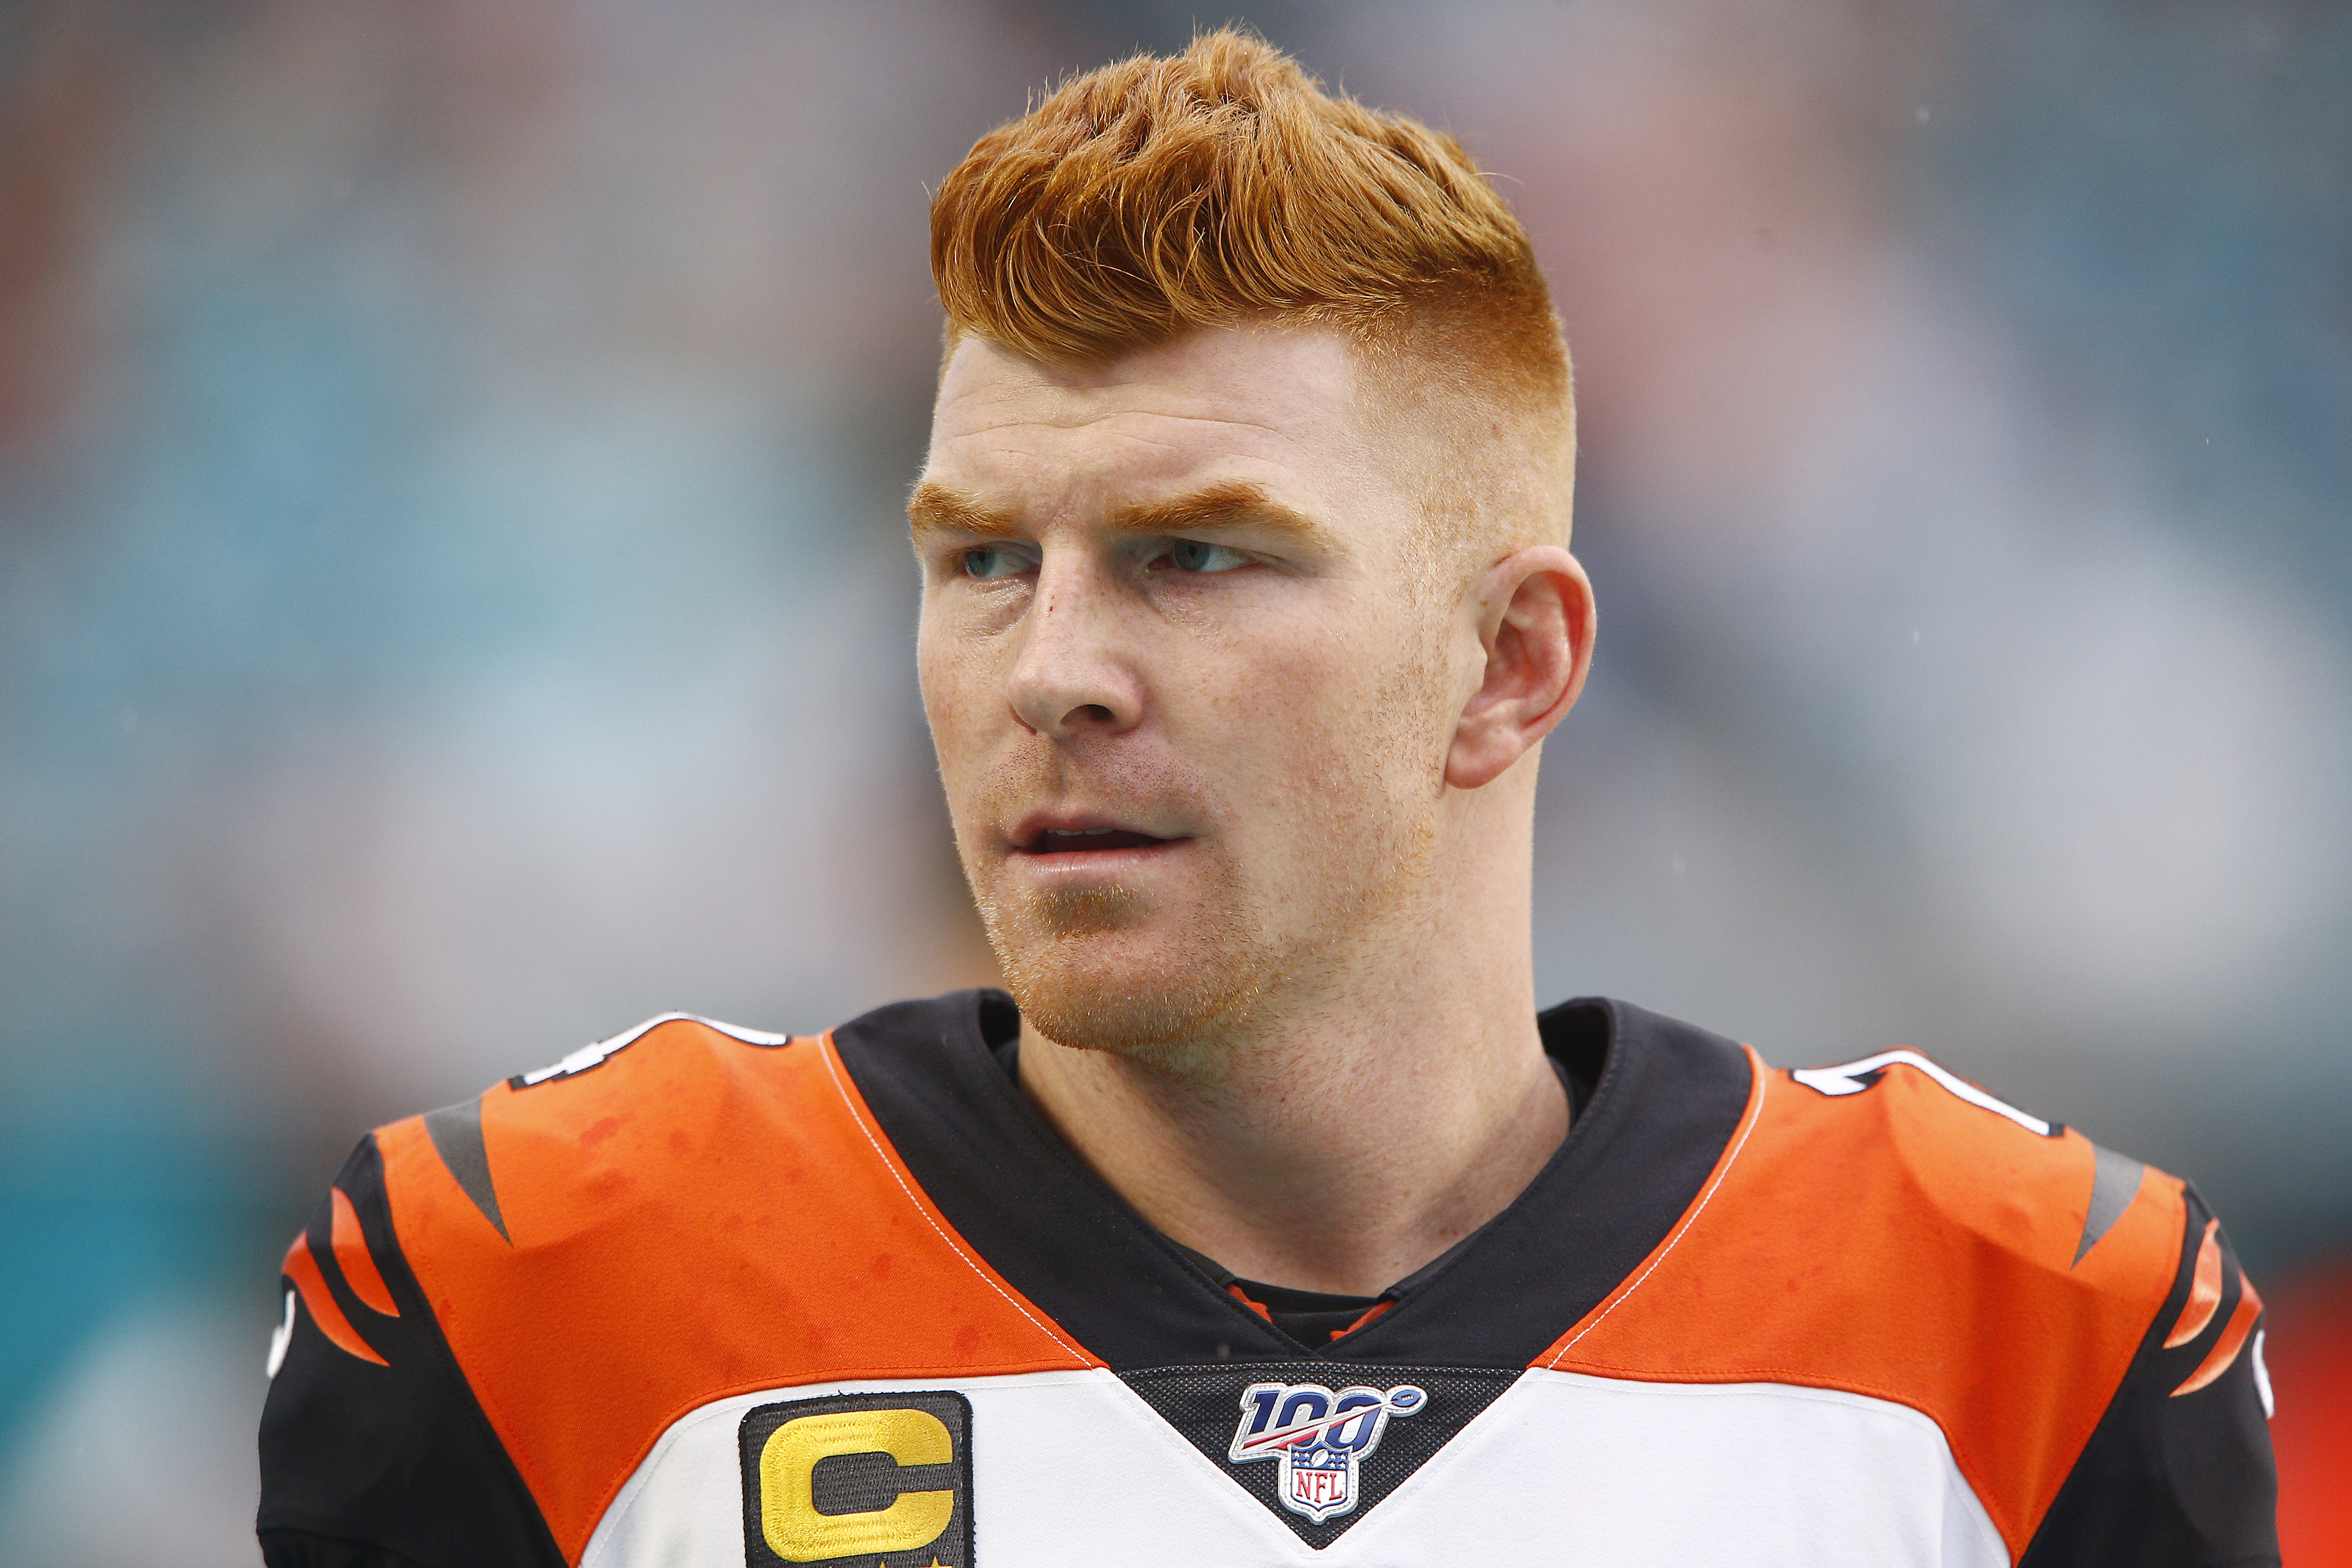 Free Agency Watch: What's to Be Done With Former Bengals Franchise QB Andy Dalton?